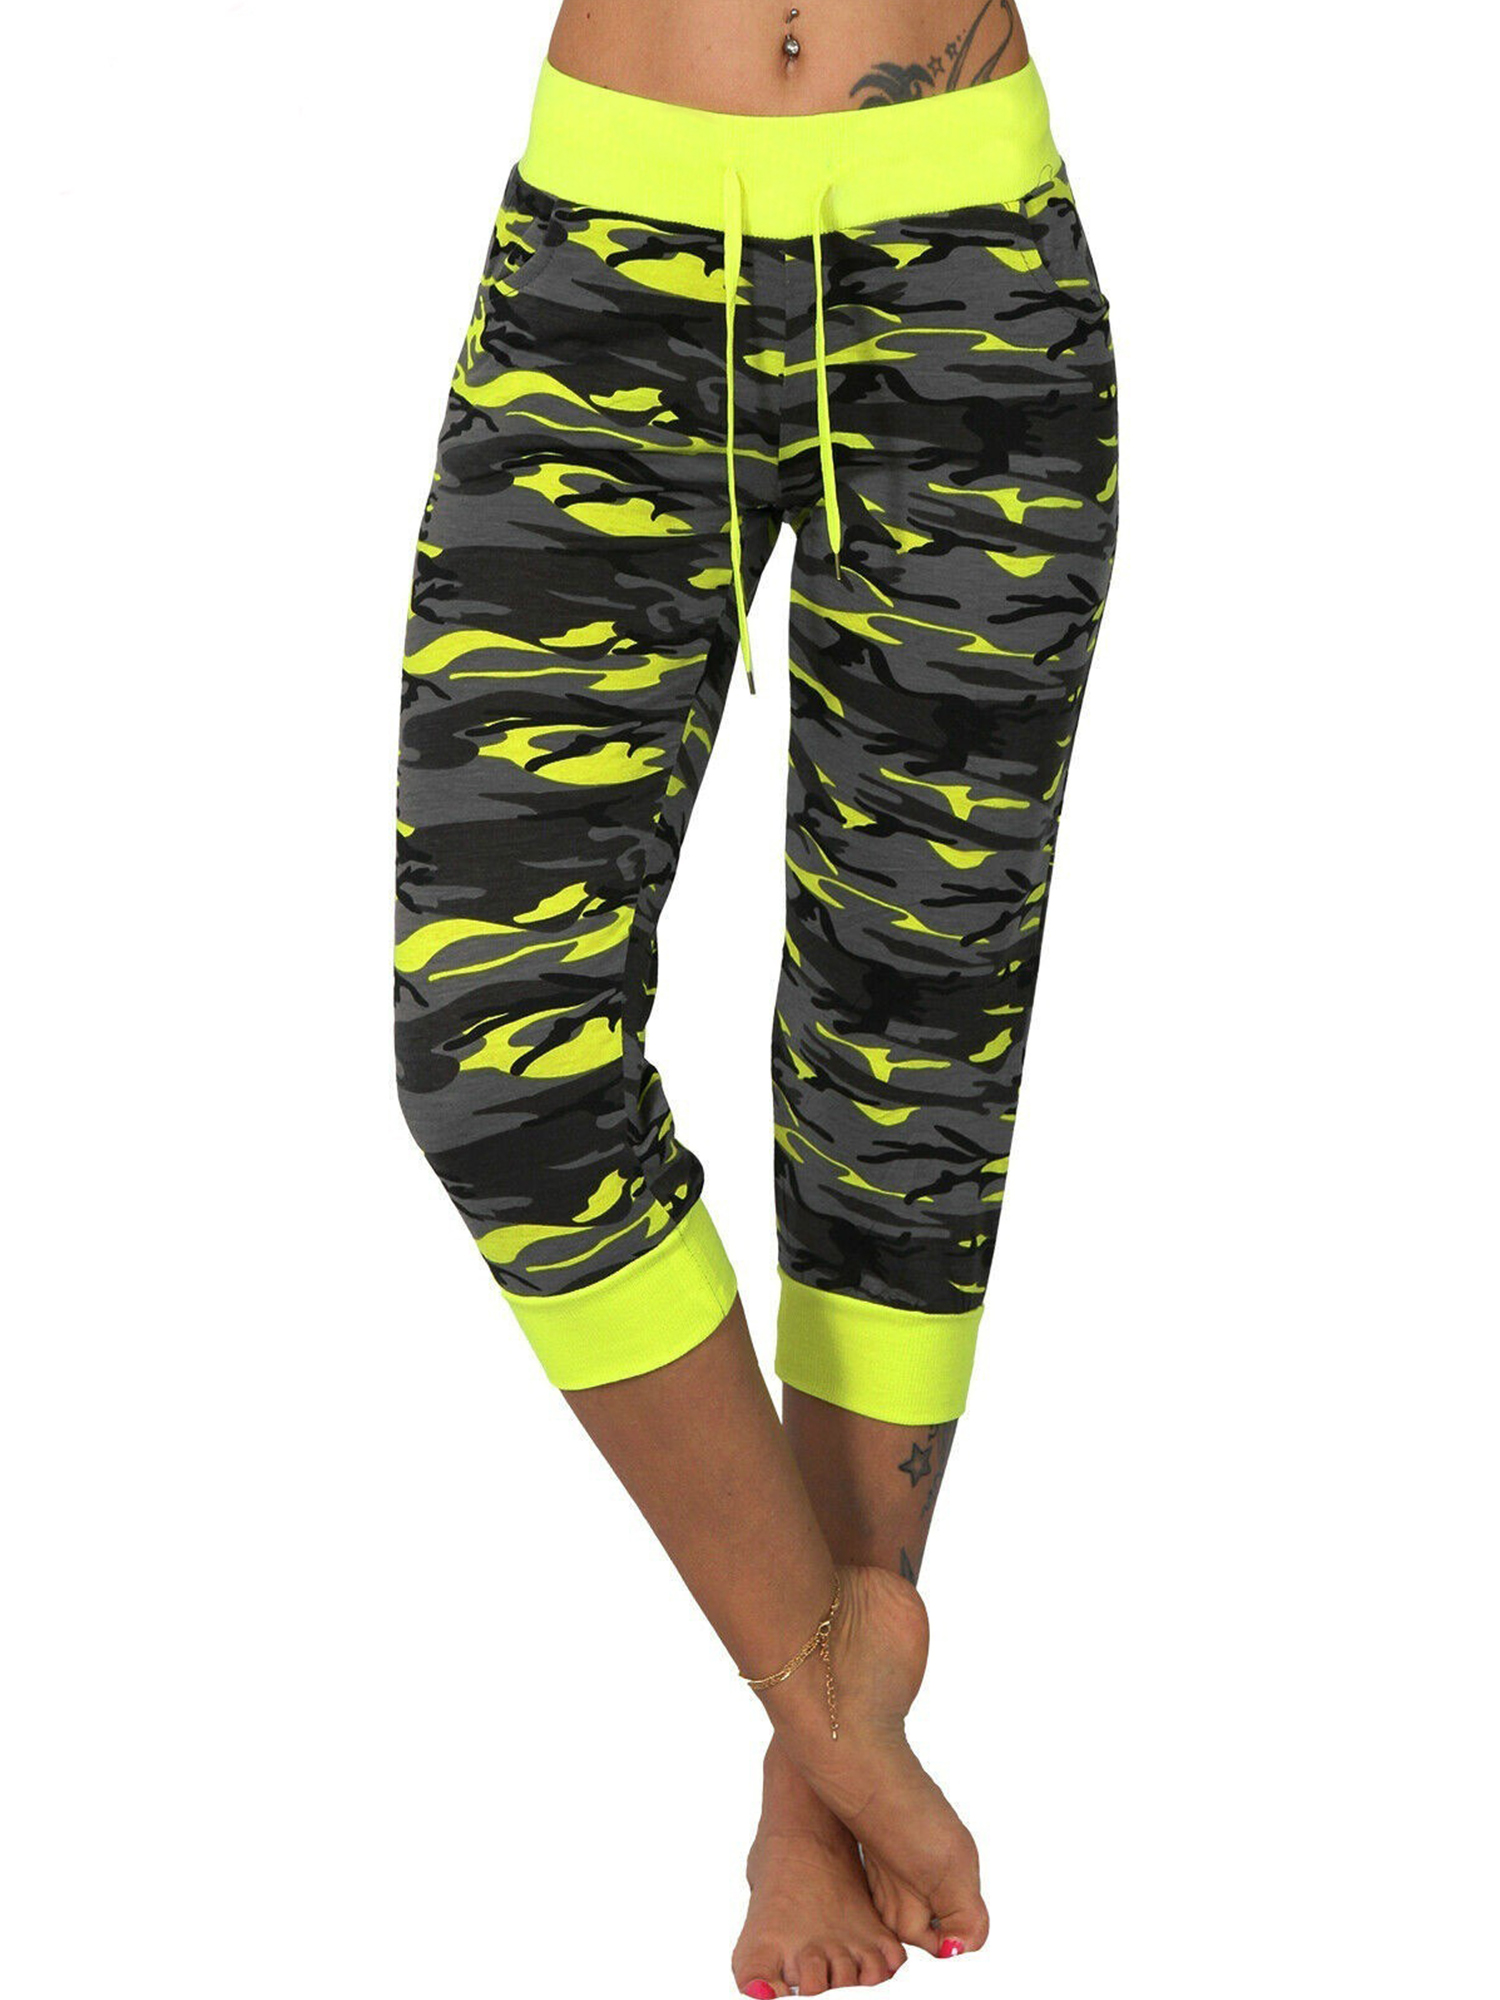 (2 Packs) Juniors' Plus Size Camo Sports Yoga Crop Jeggings High Waist Tummy Control Oversized Camouflage Pants - image 3 of 3